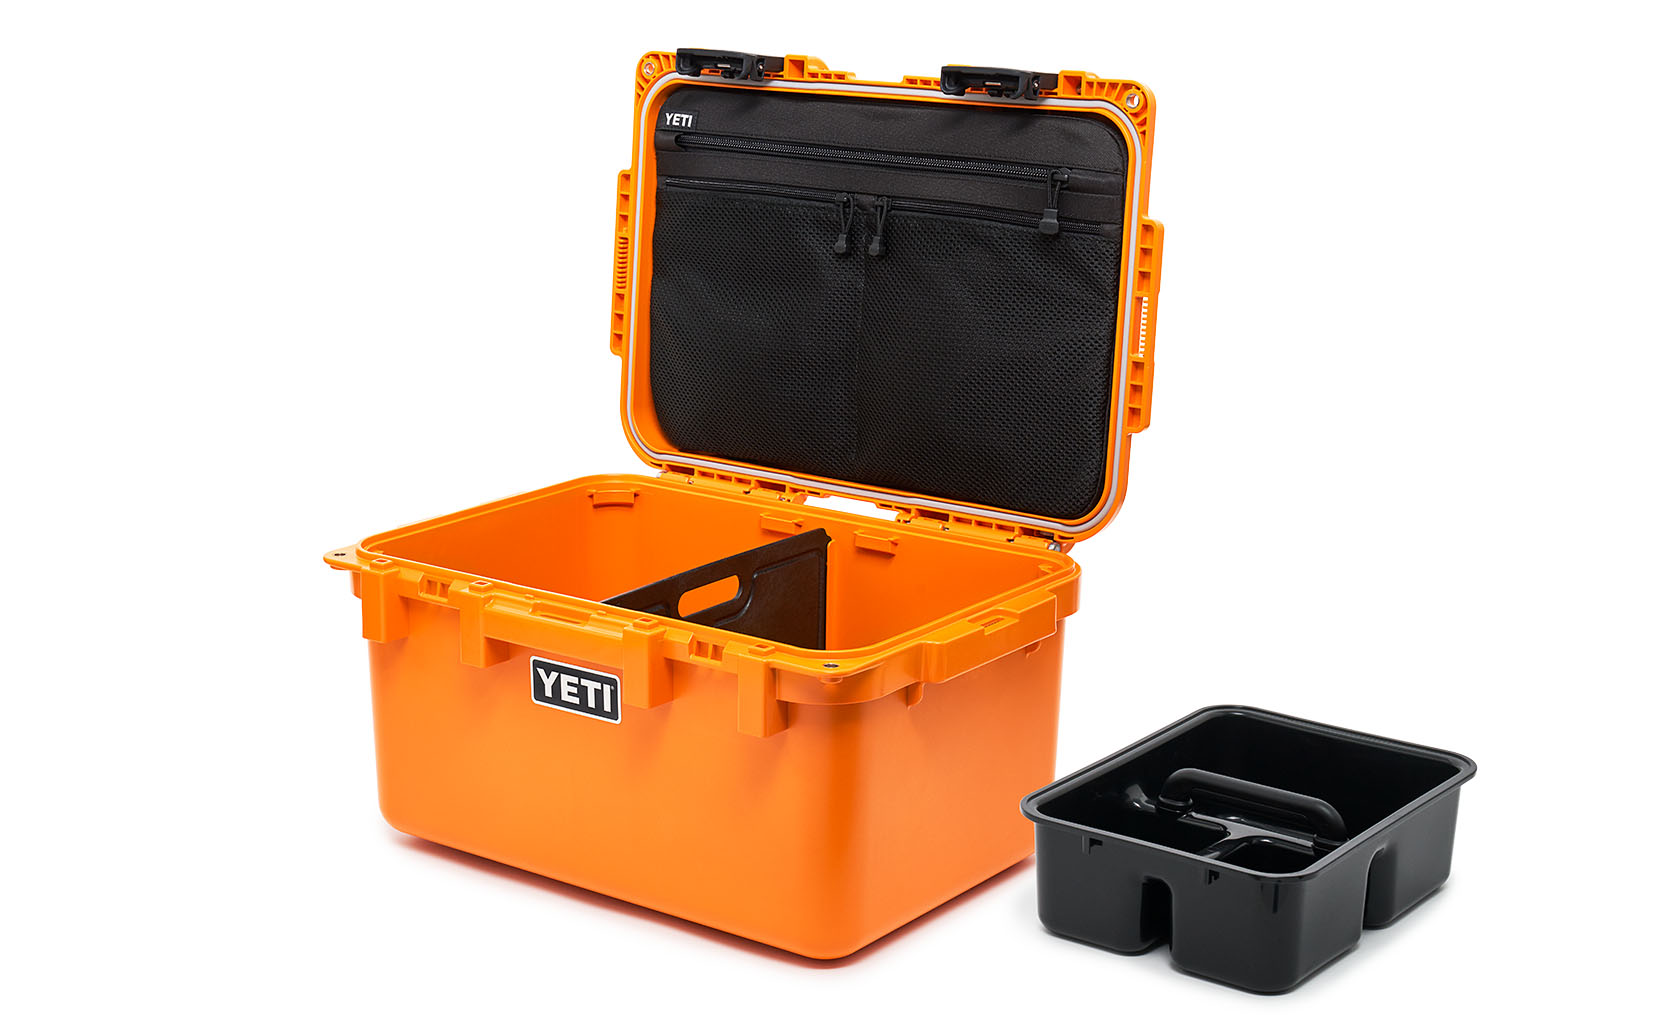 https://www.yeti.com/on/demandware.static/-/Sites-masterCatalog_Yeti/default/dw9f06554a/images/pdp-Loadout/GoBox%2030/King-Crab-Orange/200616-GoBox%20with%20Accessories-King%20Crab%20Orange-OH-Side-Open-1680x1024.jpg